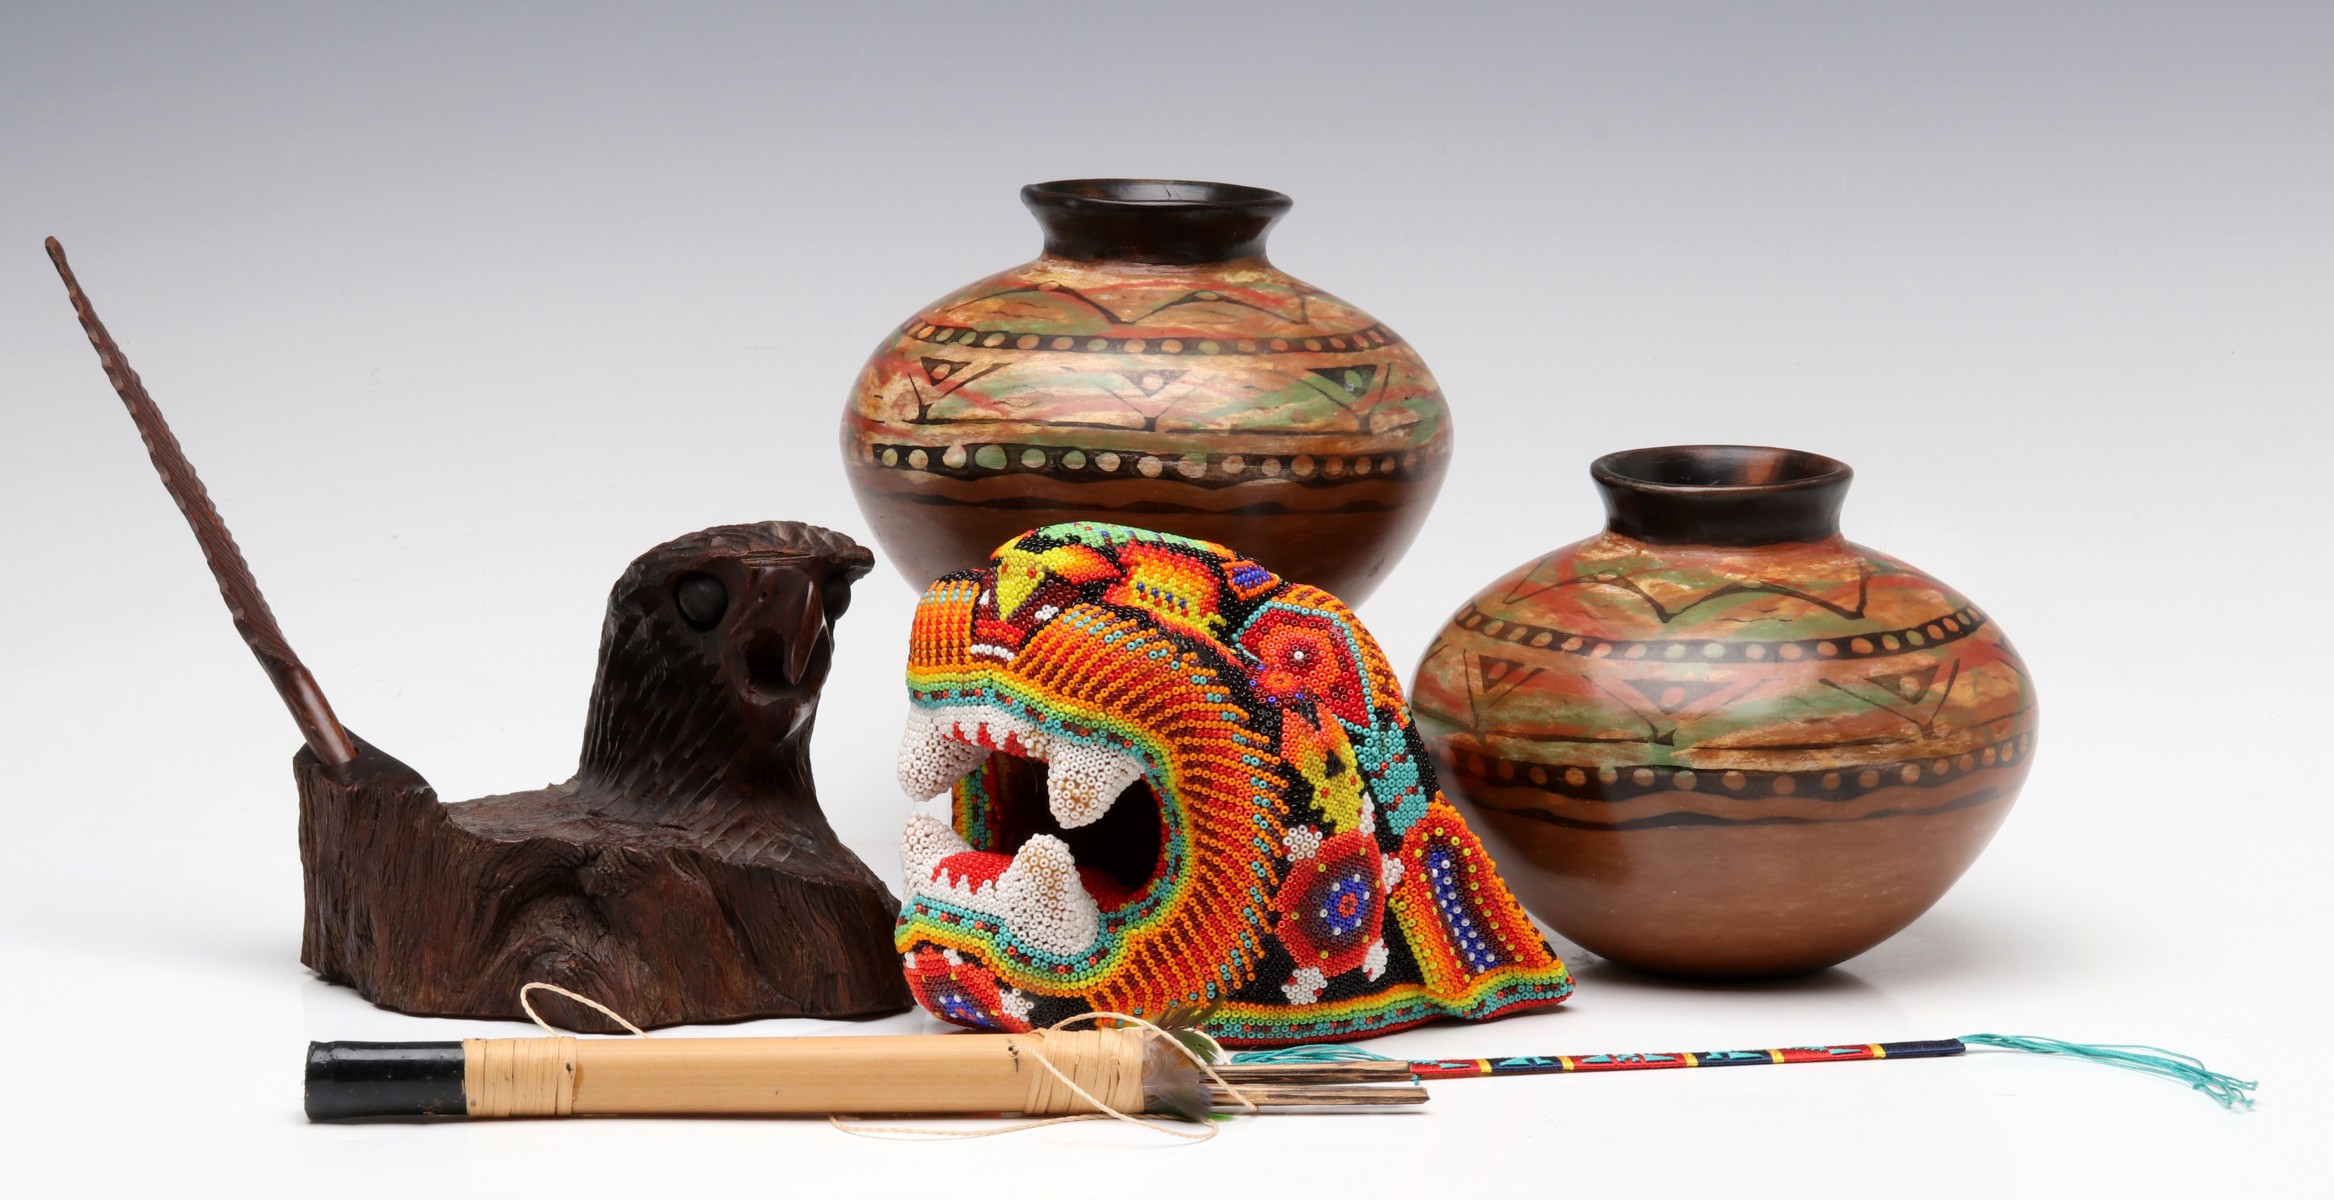 A COLLECTION OF MEXICAN AND S. AMERICAN ARTISAN CRAFTS